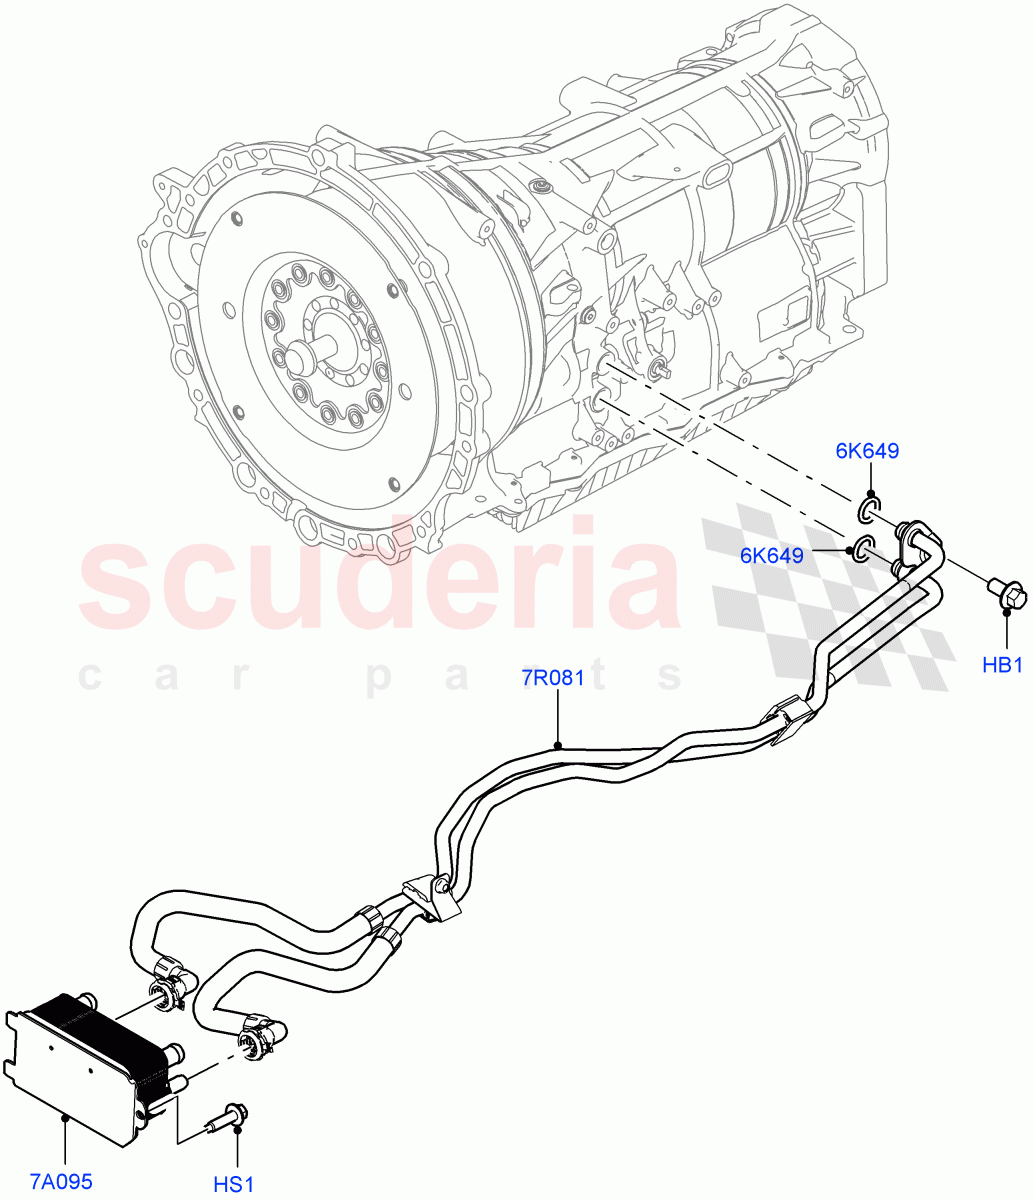 Transmission Cooling Systems(Solihull Plant Build)(2.0L I4 High DOHC AJ200 Petrol,8 Speed Auto Trans ZF 8HP45)((V)FROMJA000001) of Land Rover Land Rover Range Rover Sport (2014+) [4.4 DOHC Diesel V8 DITC]